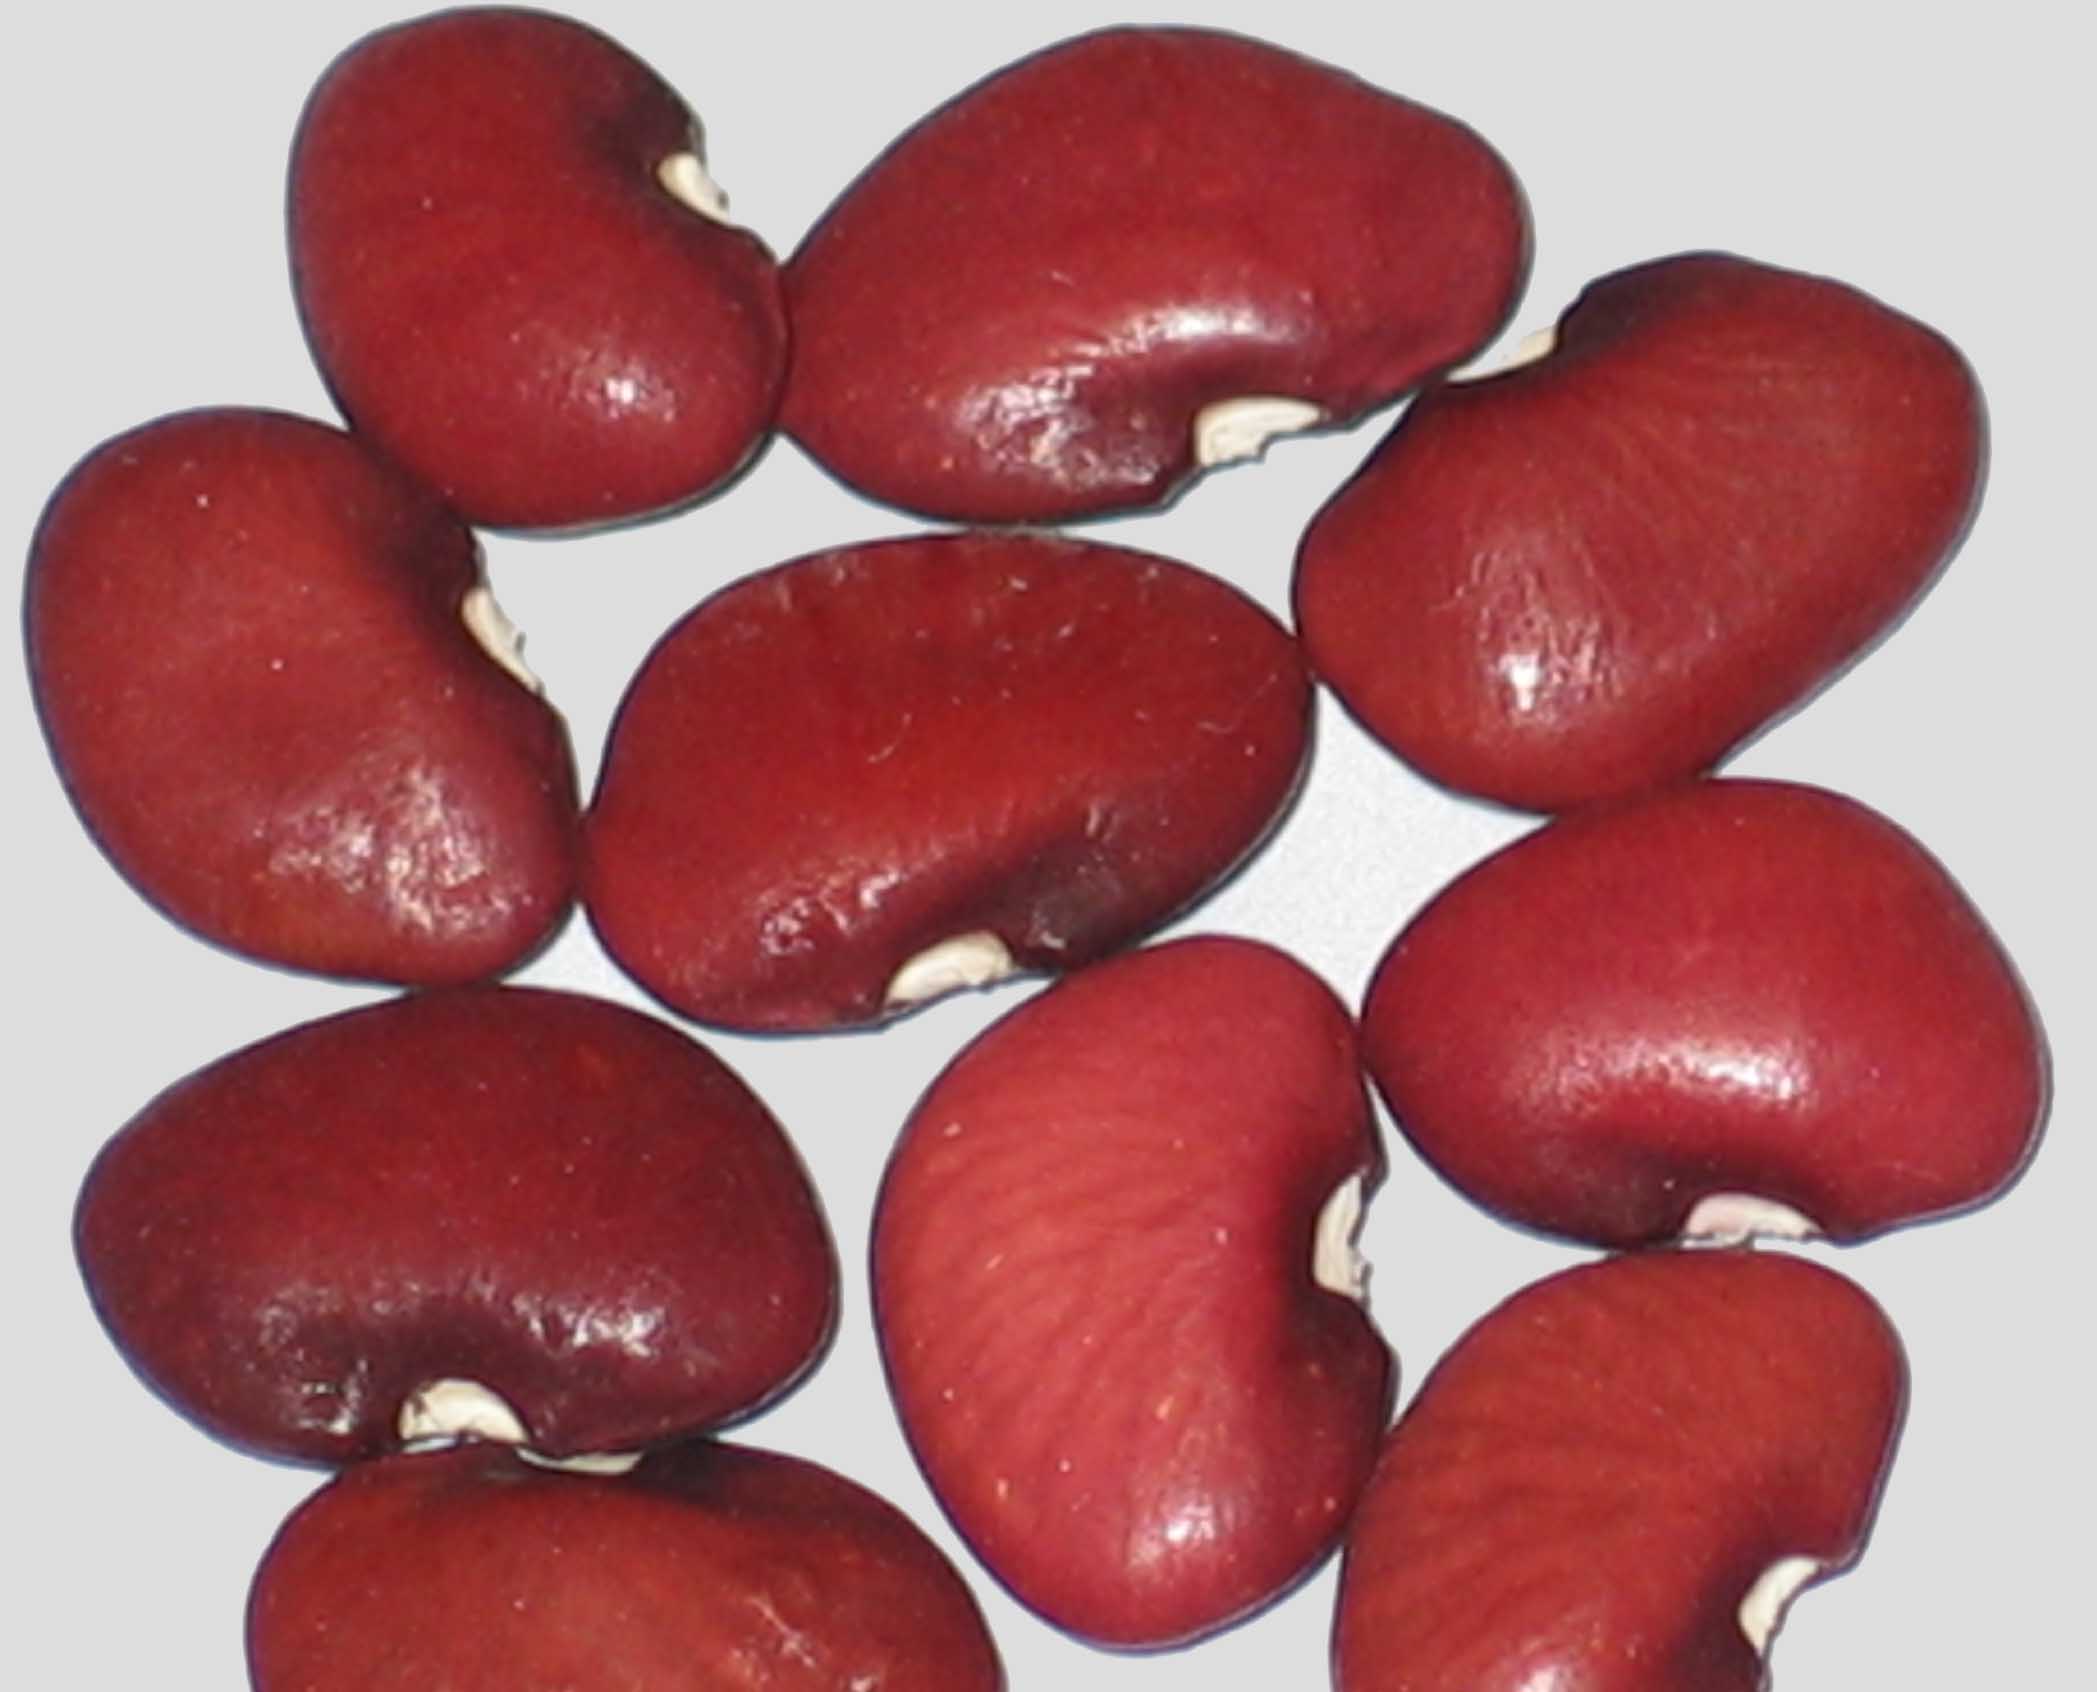 image of Red Lima beans